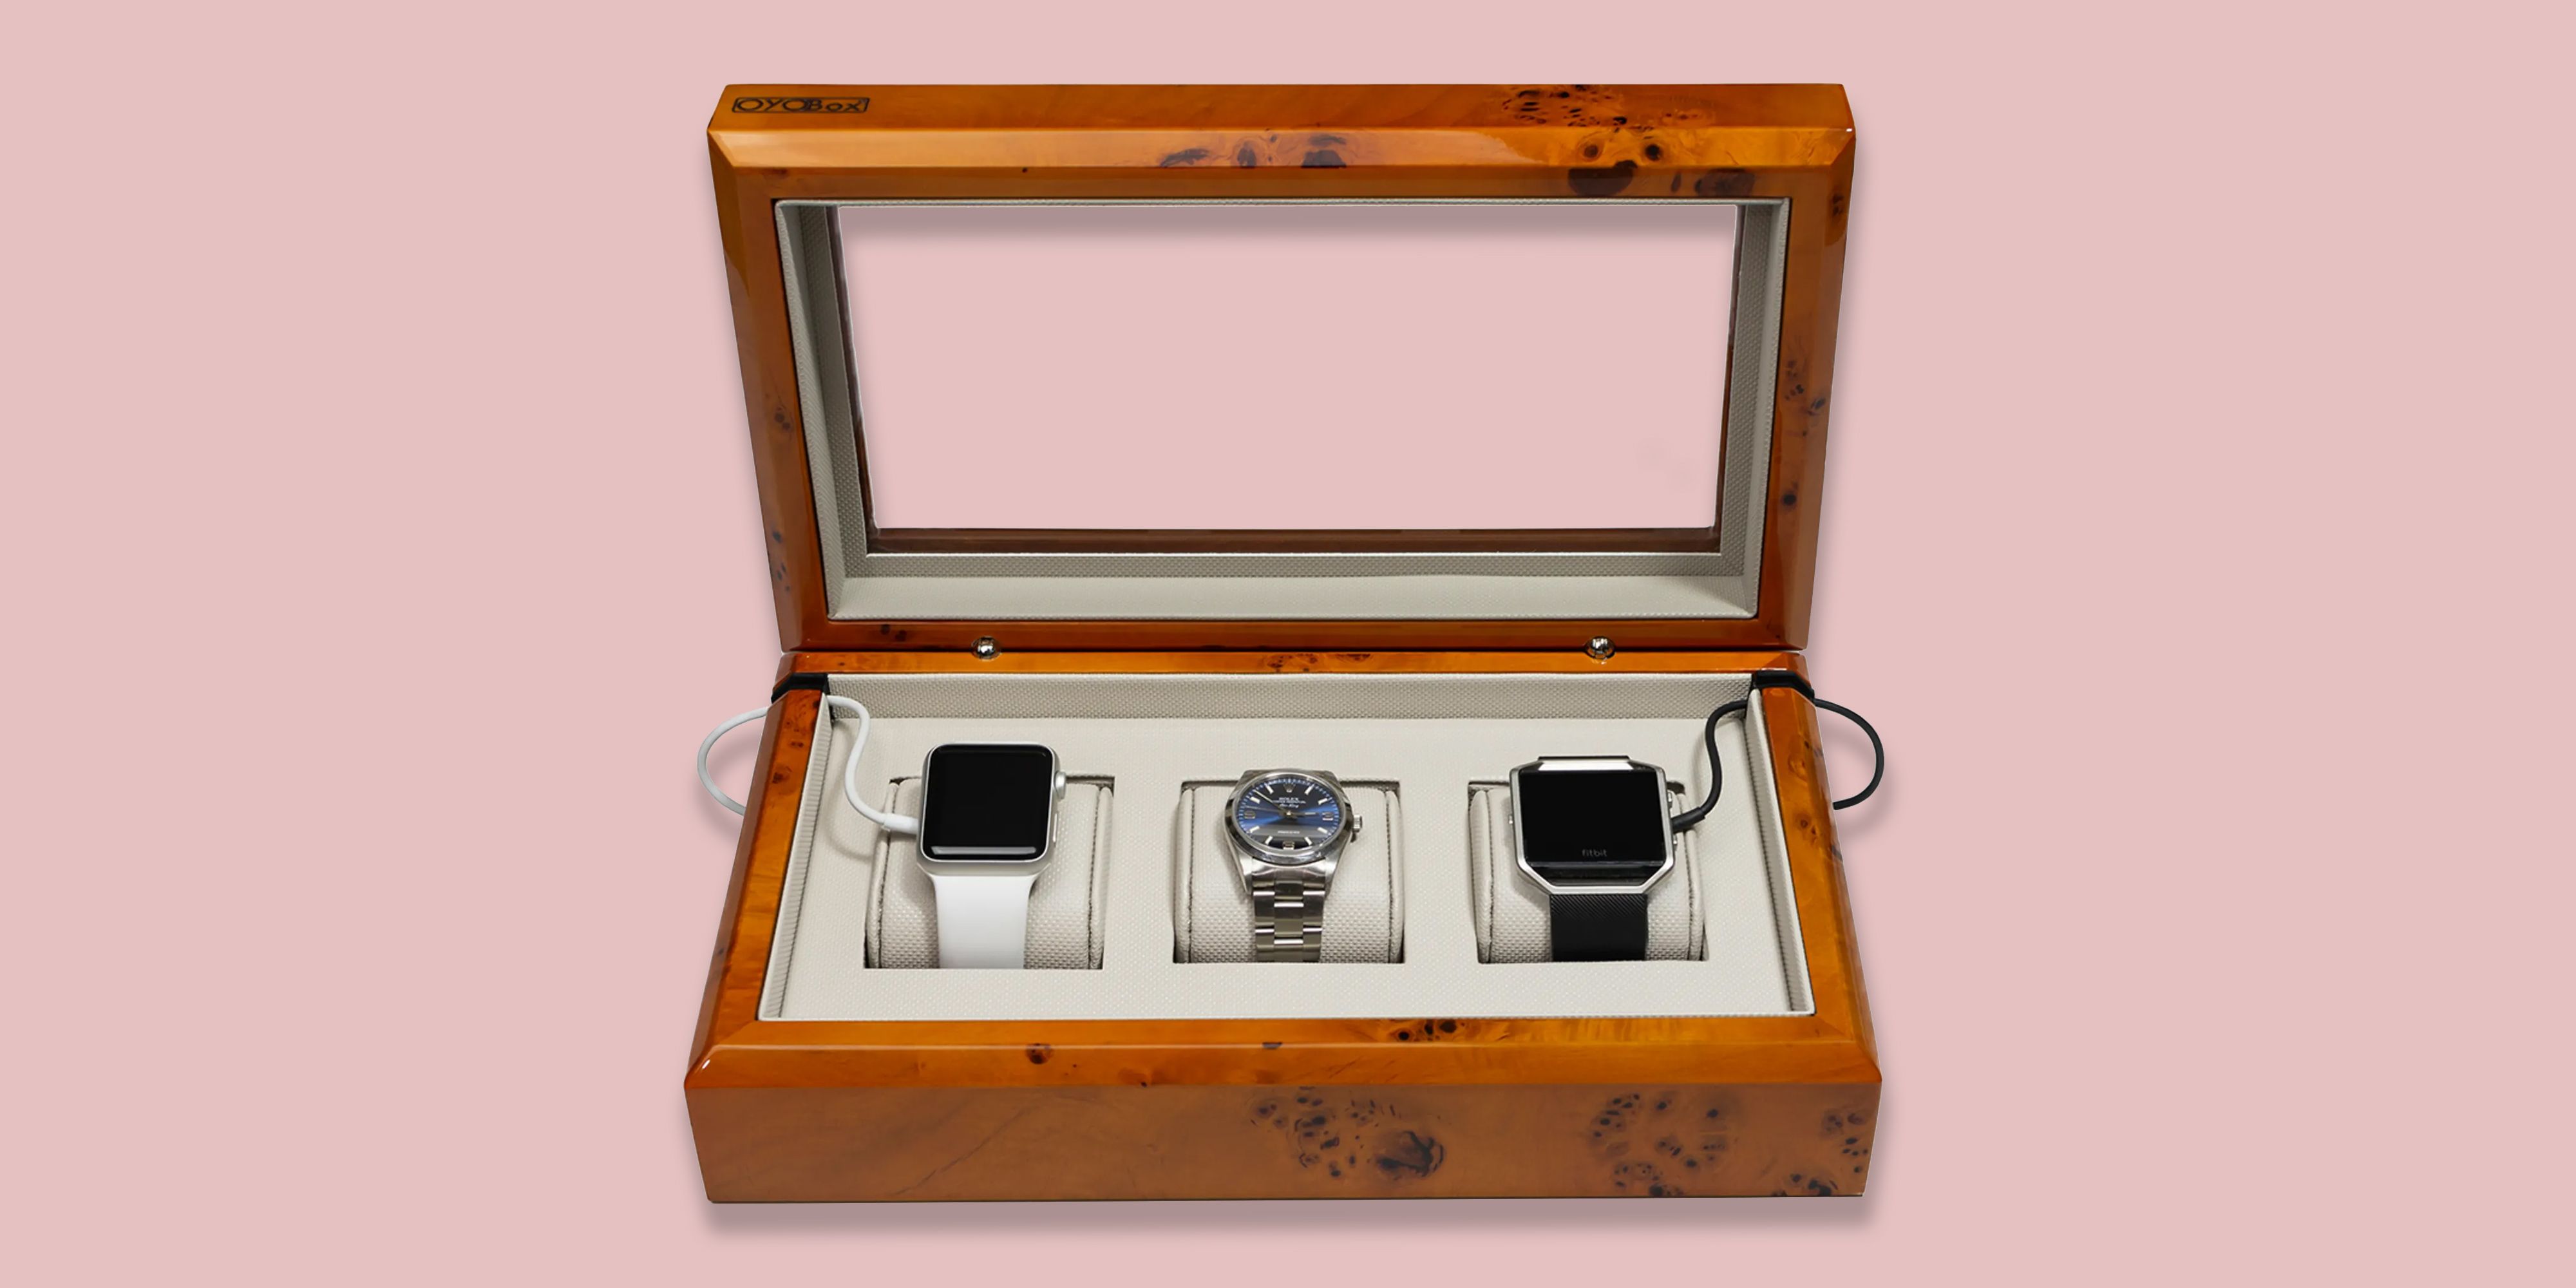 The Gold Centre - Lovely Louis Vuitton watch box with a serious